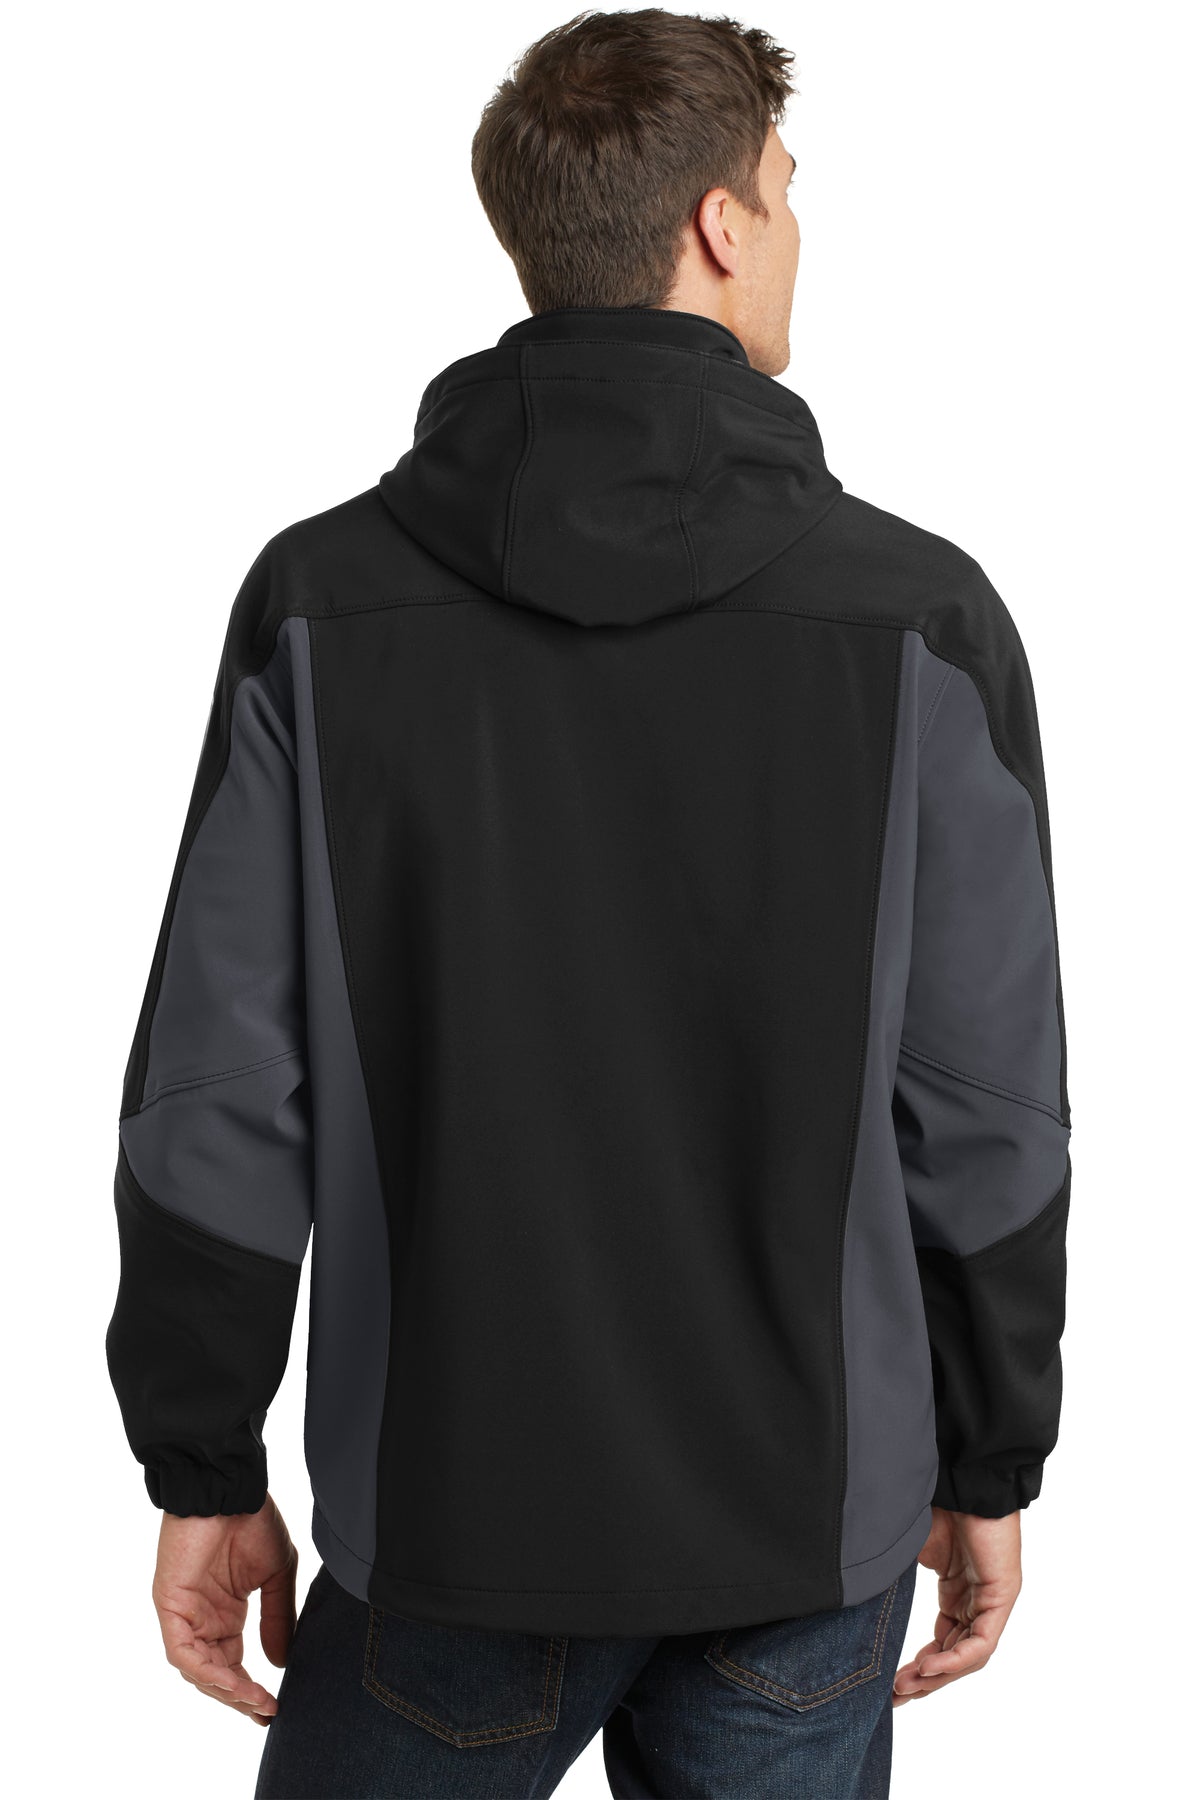 Port Authority Tall Waterproof Customized Soft Shell Jackets, Black/ Graphite